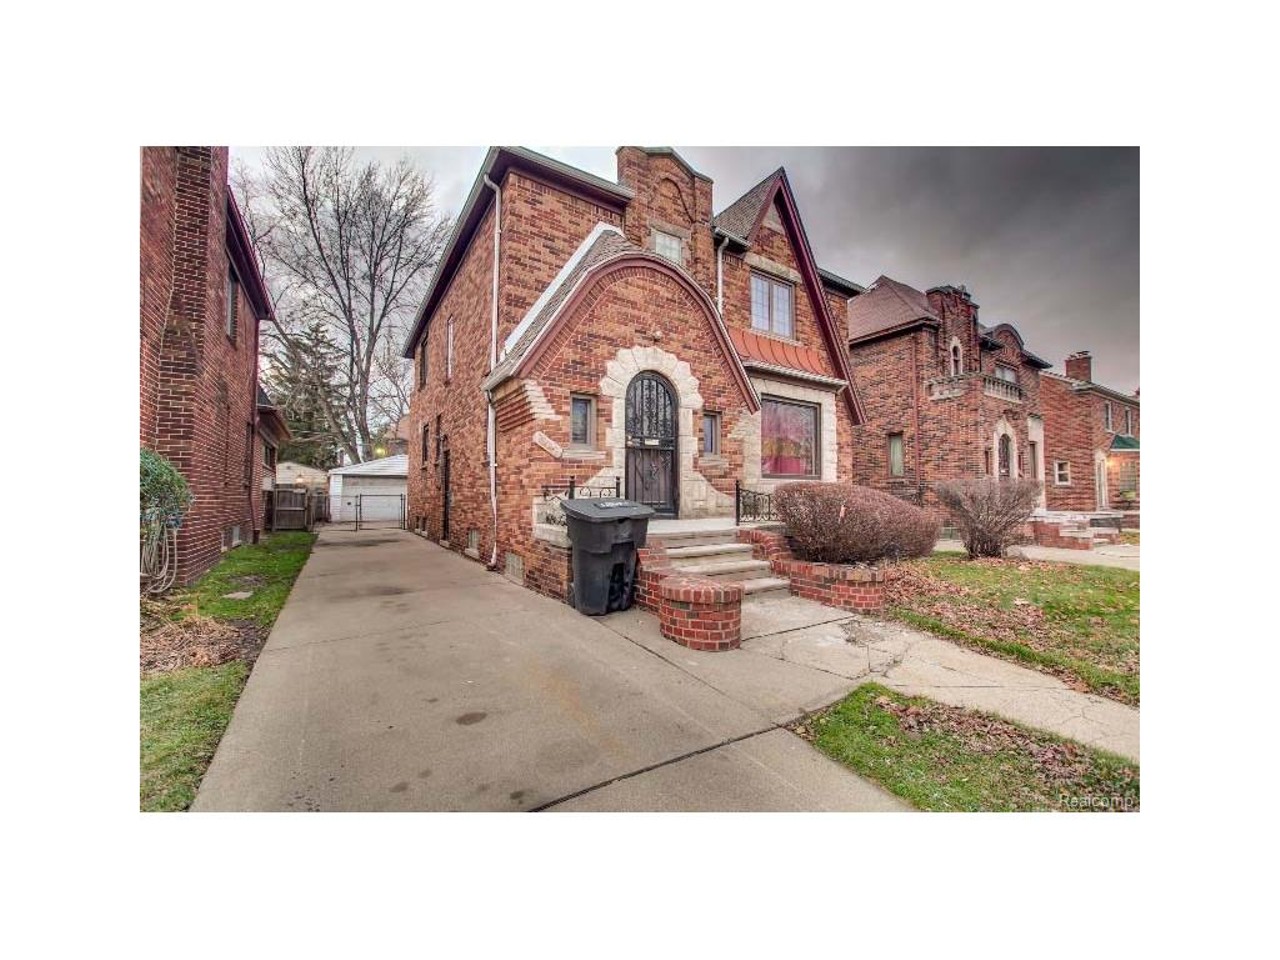 18019 Ohio St, Detroit
$100,000; 3 beds, 1.1 bath
This charming little house on Ohio St, was built a long time ago and the architecture shows that. The big curves in the entrance ways are stunning, as well as the gorgeous hardwood floors.